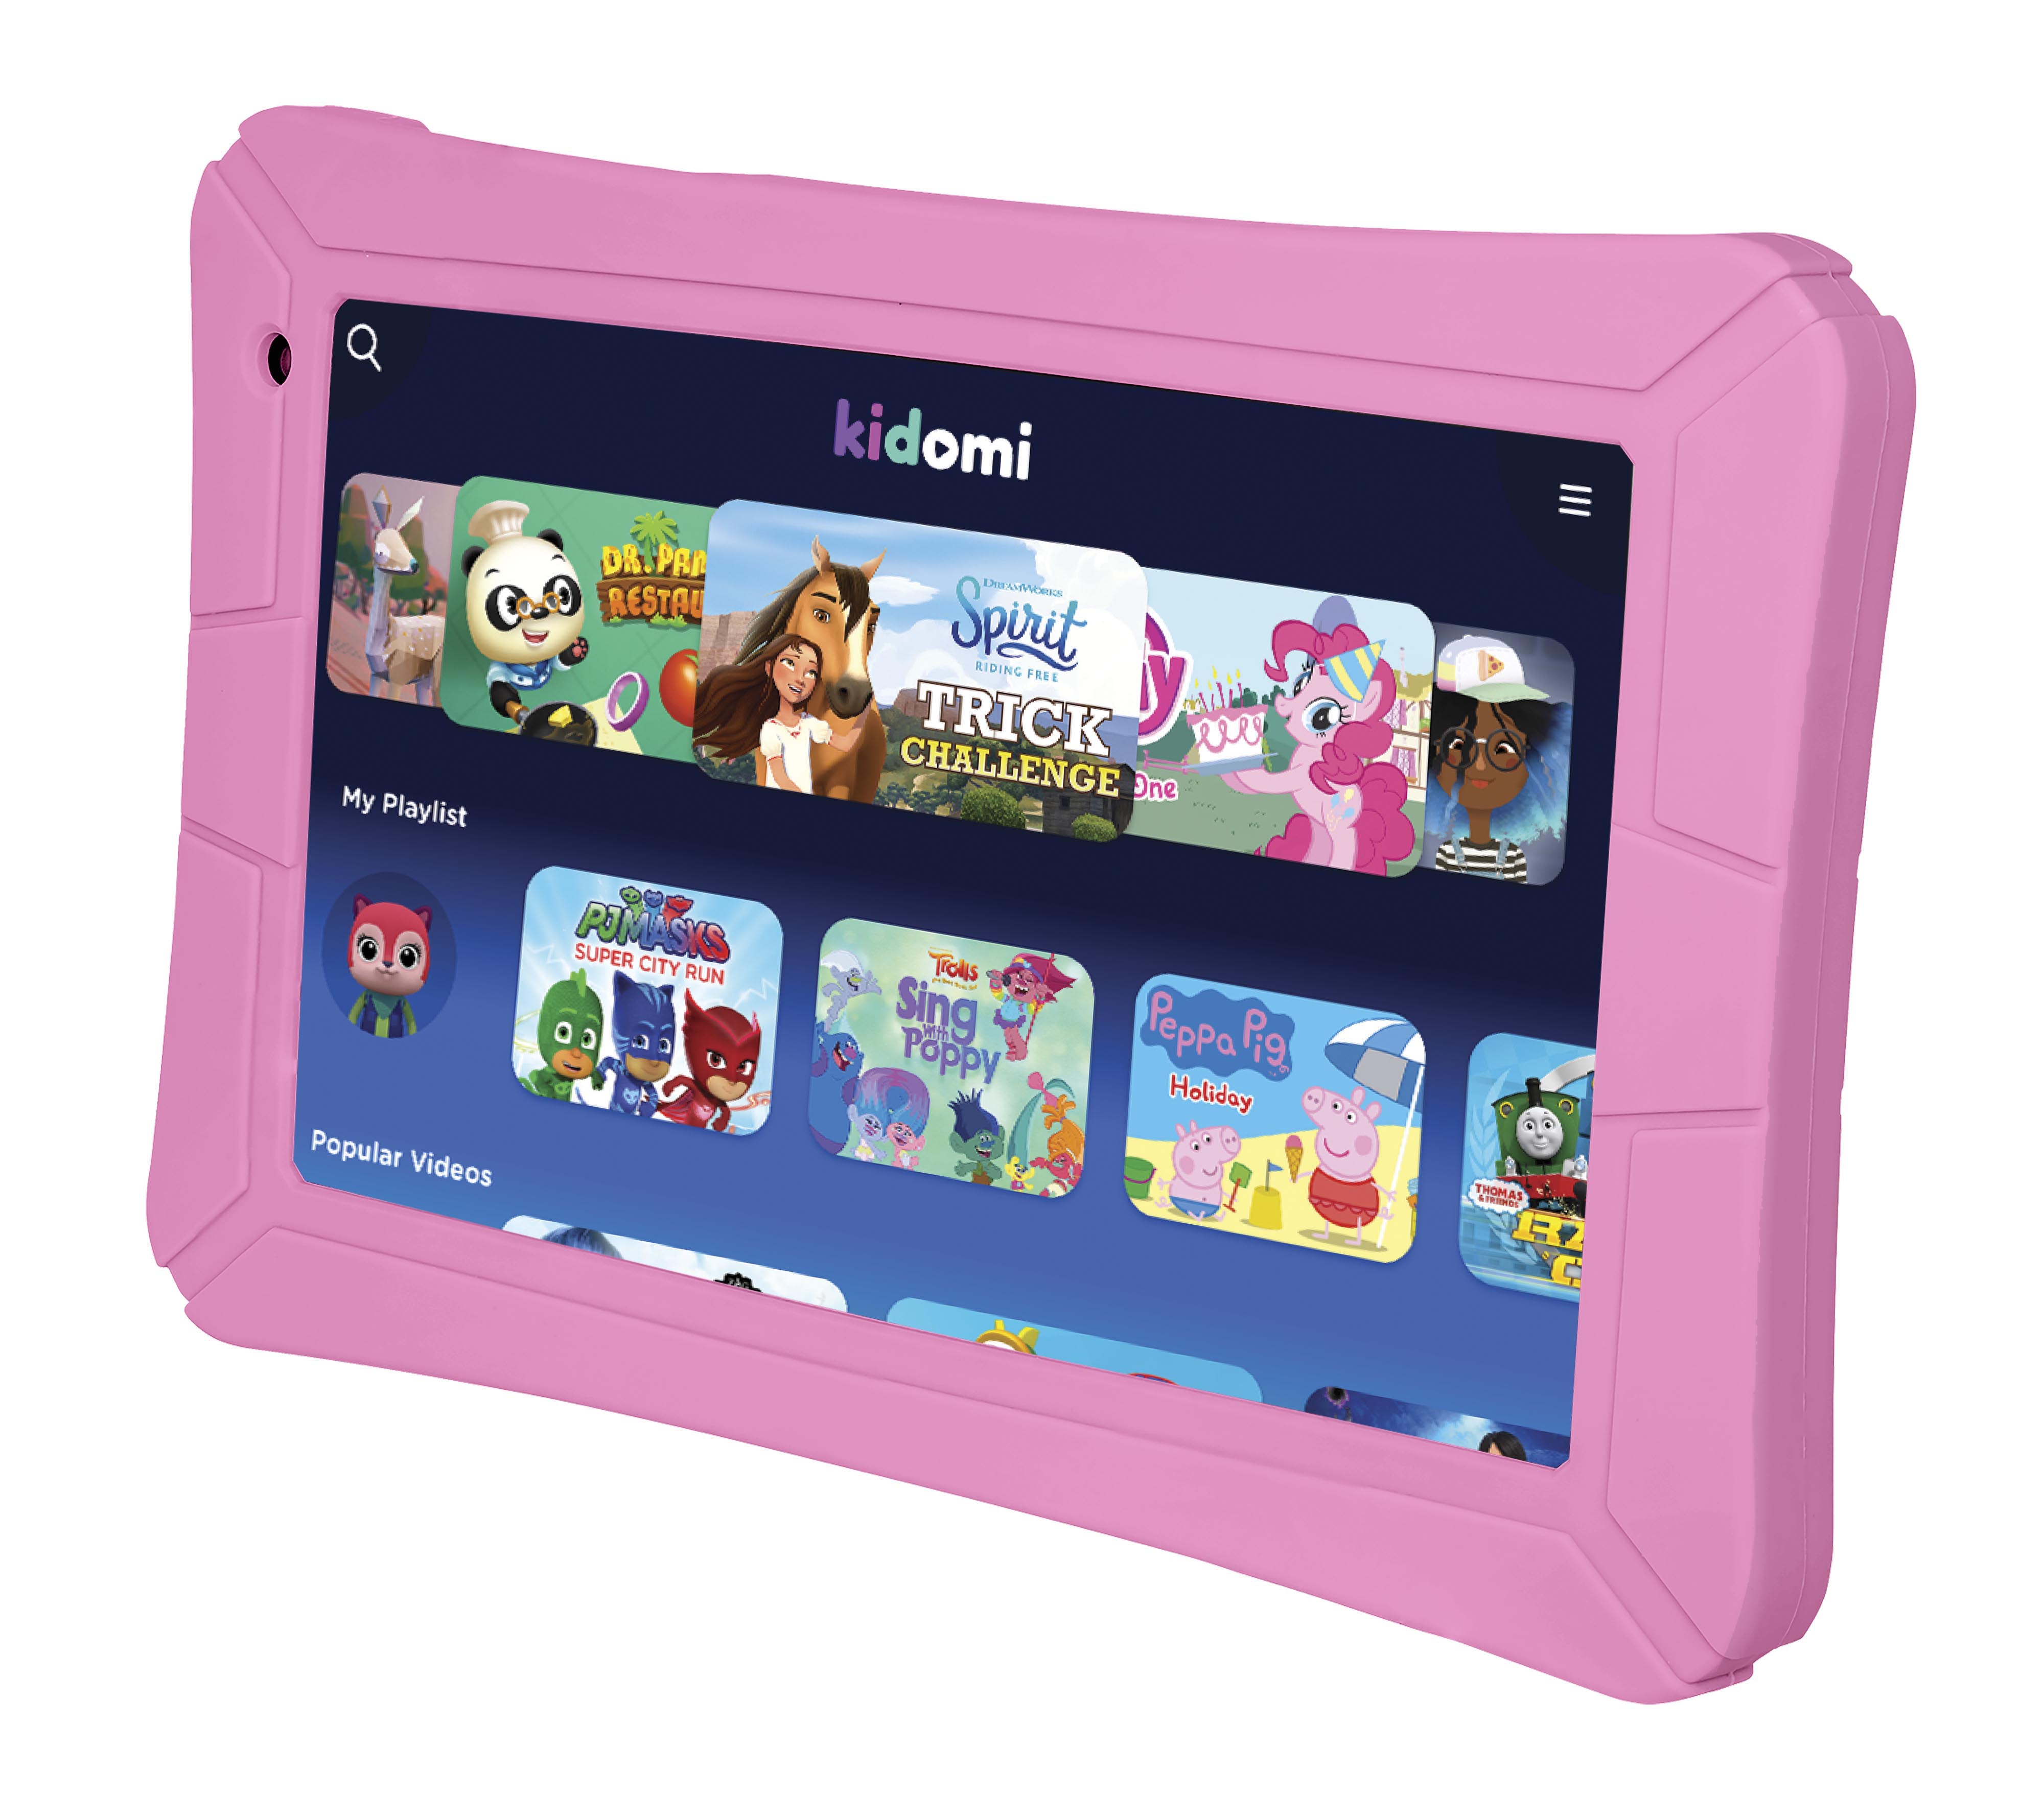 HighQ 7" Learning Tab Jr. featuring Kidomi, Gel Case Included, Quad Core Processor, 8GB Storage, Android 8.1 Go Edition, Dual Cameras, Kidomi Free Trial Included, Pink - image 5 of 6